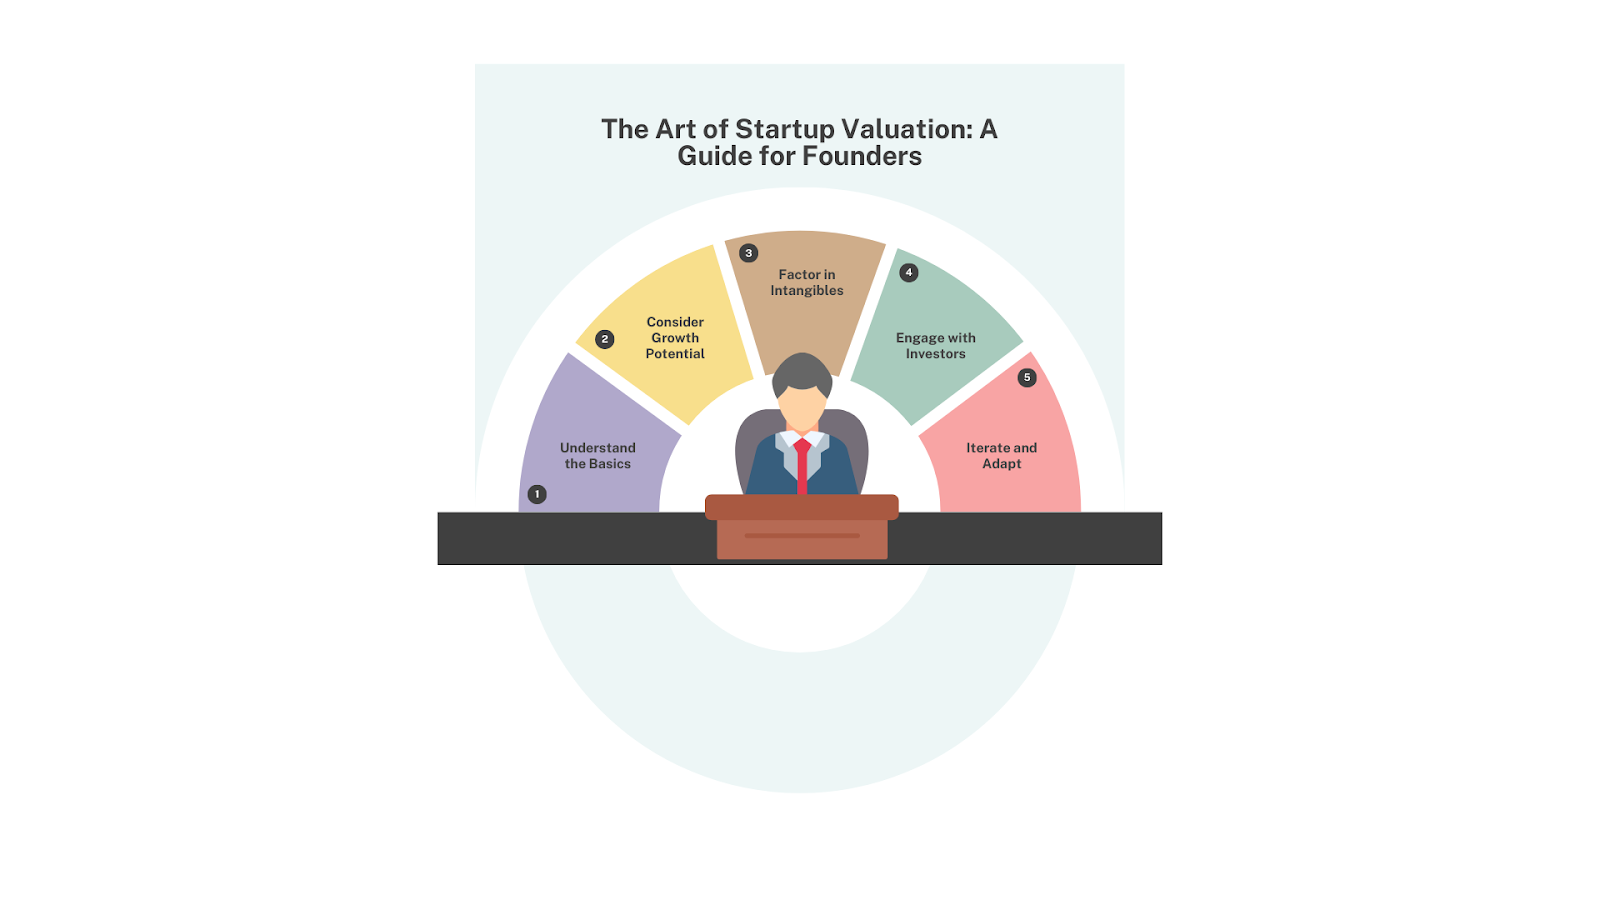 The Art of Startup Valuation: A Guide for Founders.